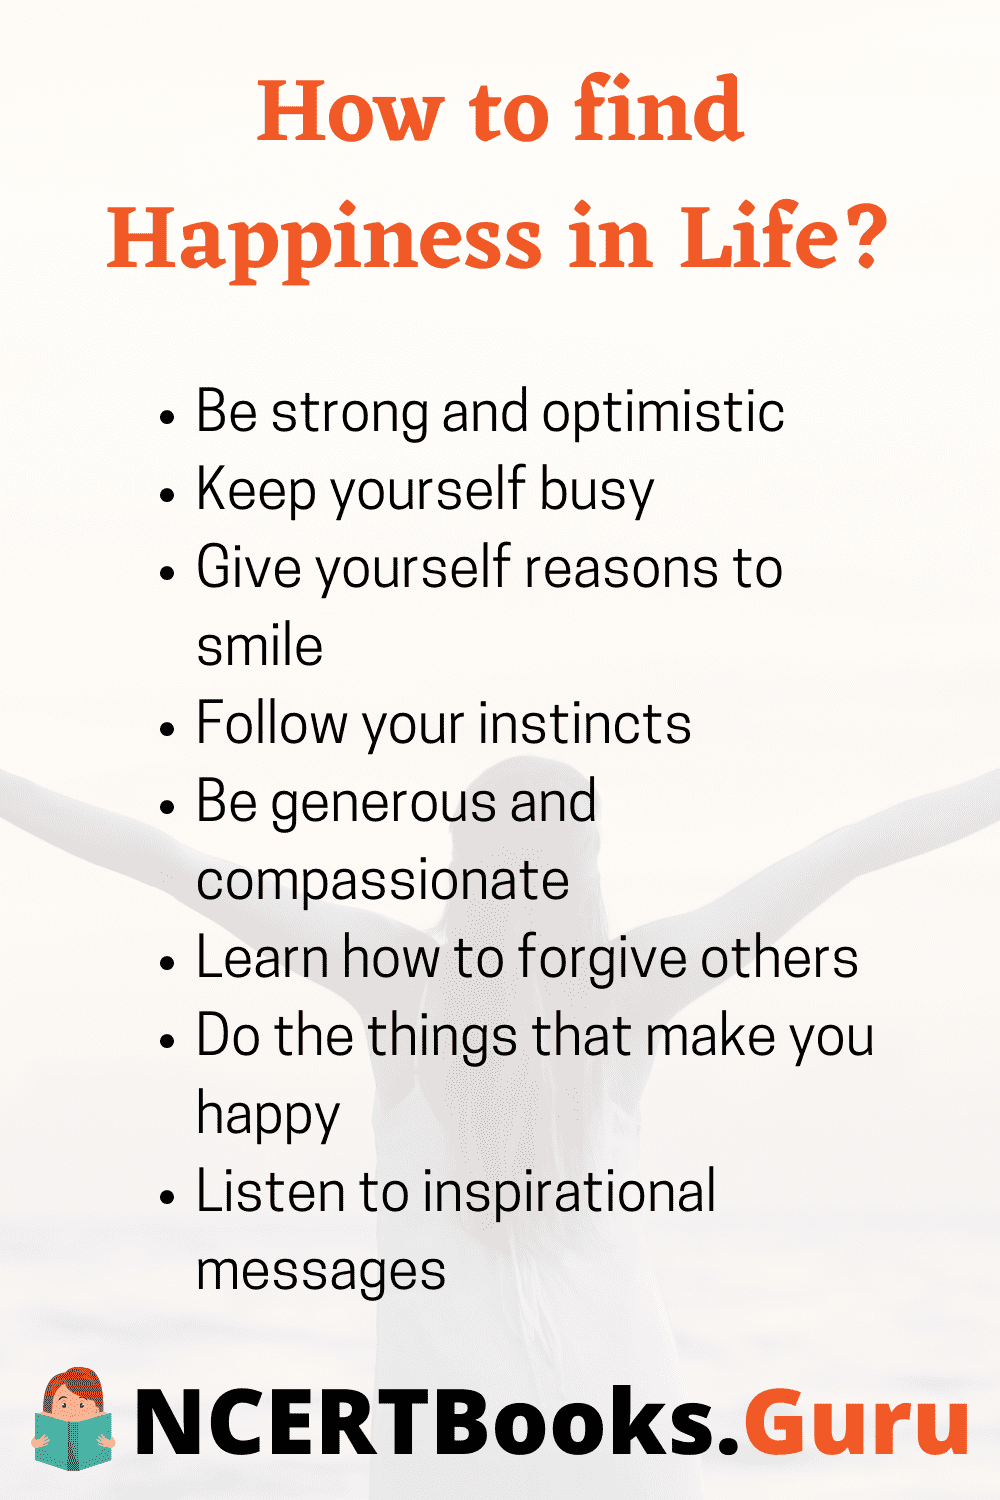 How to find Happiness in Life